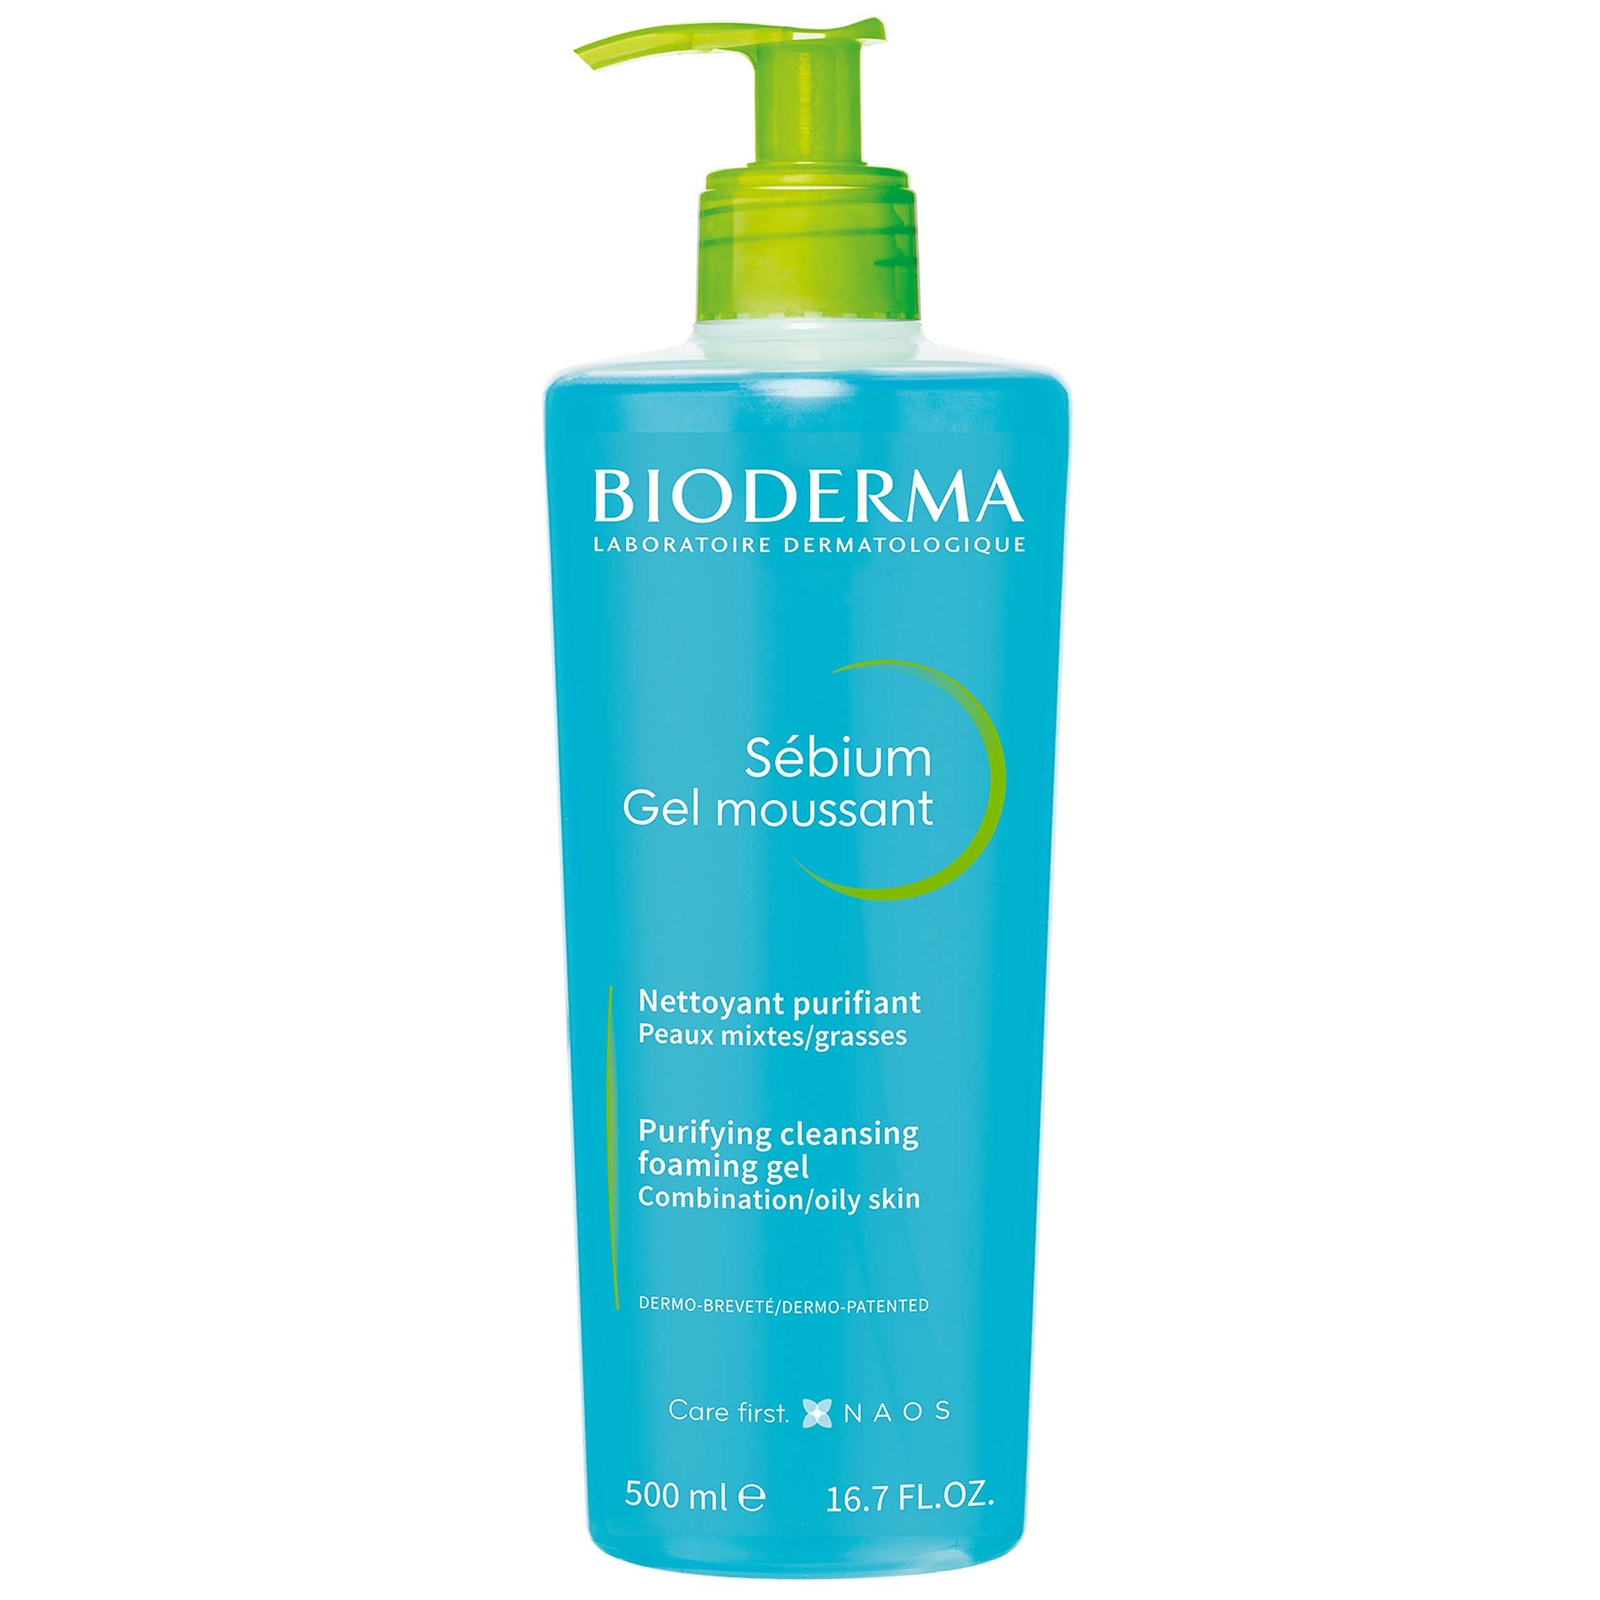 Photos - Facial / Body Cleansing Product Bioderma Sébium Purifying Foaming Gel Oily to Blemish-Prone Skin 500ml 286 